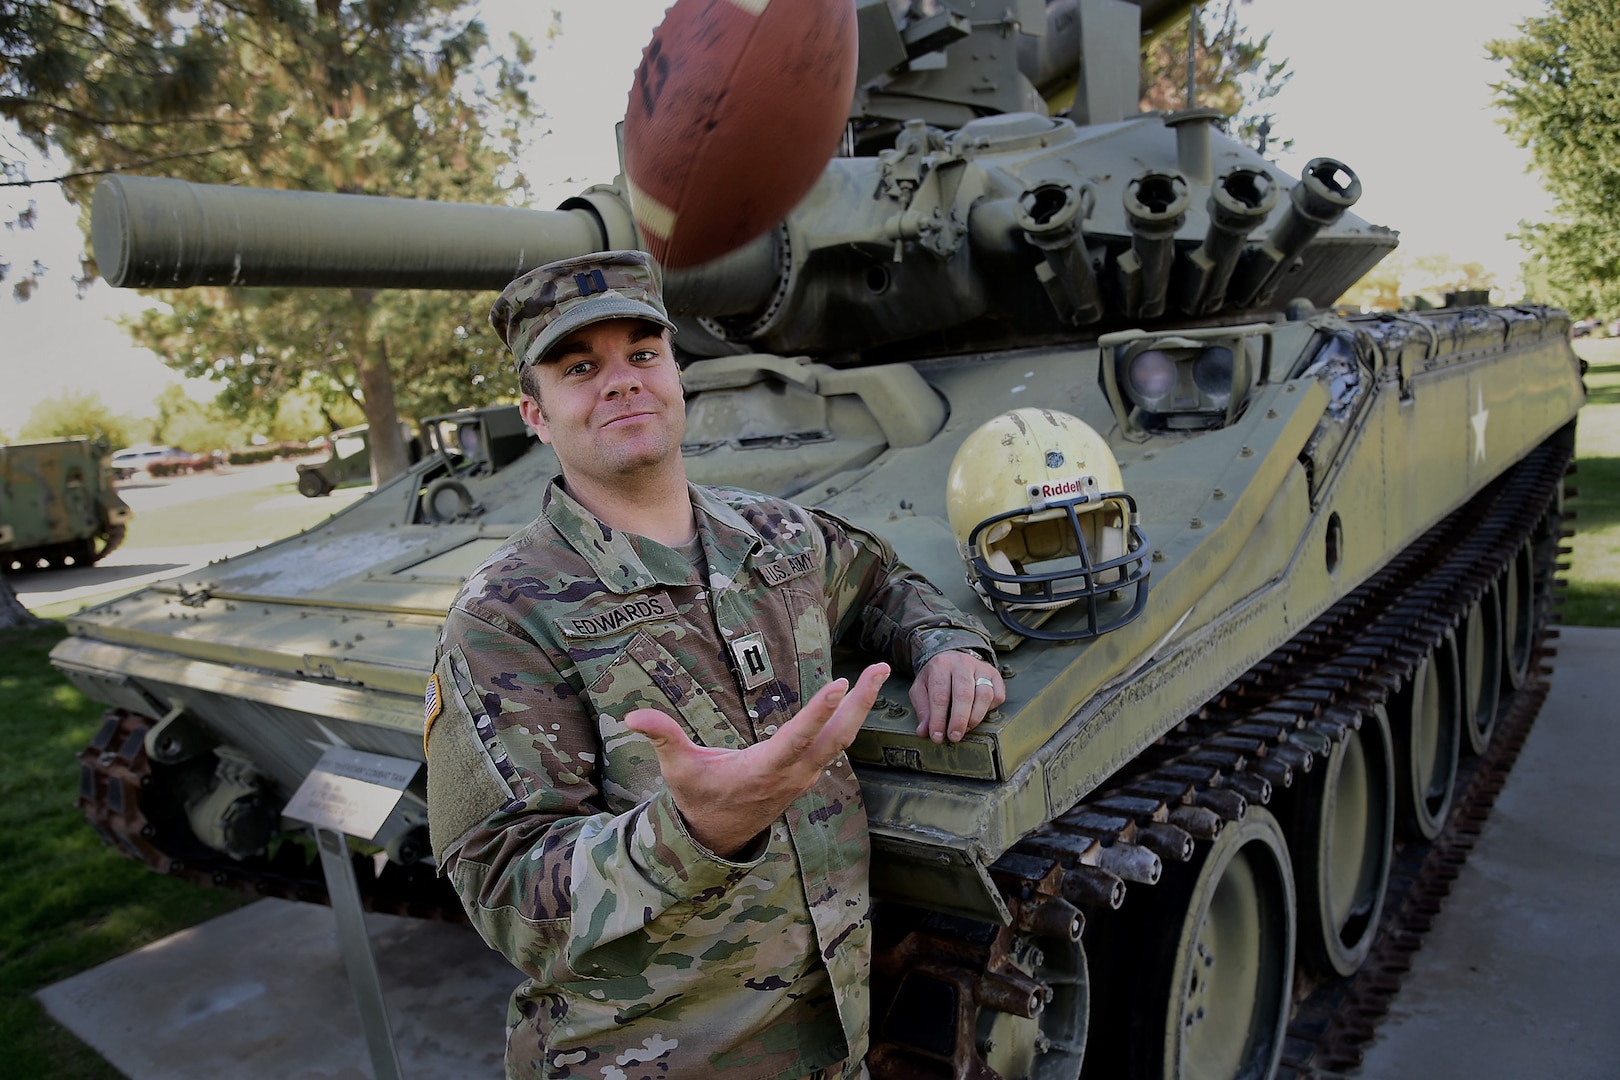 Idaho Army National Guard Capt. A.J. Edwards poses for a photo while tossing a football Sept. 27, 2018, on Gowen Field, Boise, Idaho. Edwards was struck by lightning on Sept. 30, 1998, at a football practice in Inkom, Idaho. He was wearing the helmet and holding the football shown. His teammates signed the football.